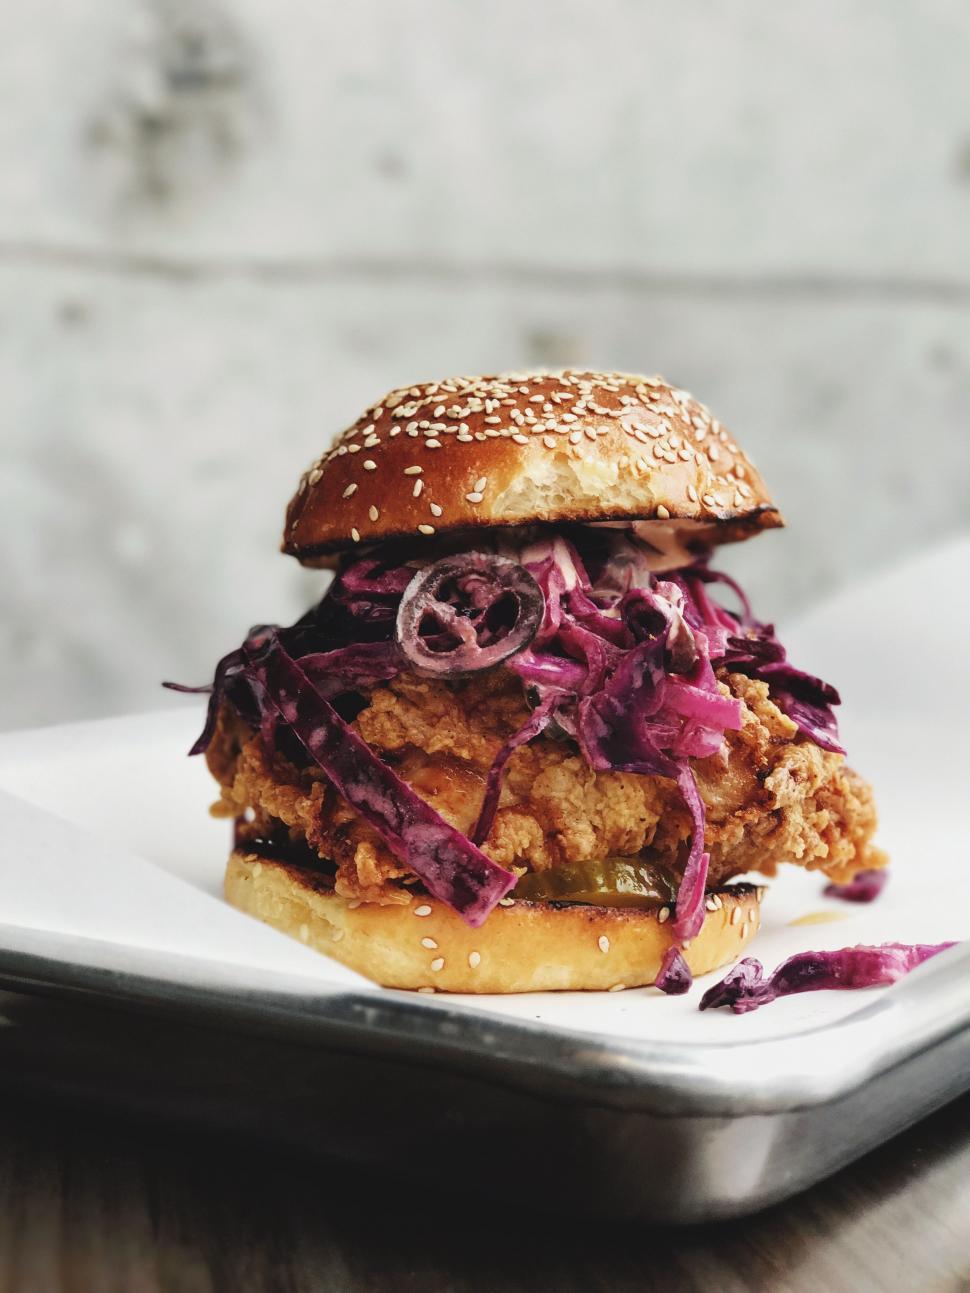 Free Image of Fried Chicken Sandwich With Red Cabbage on a Plate 